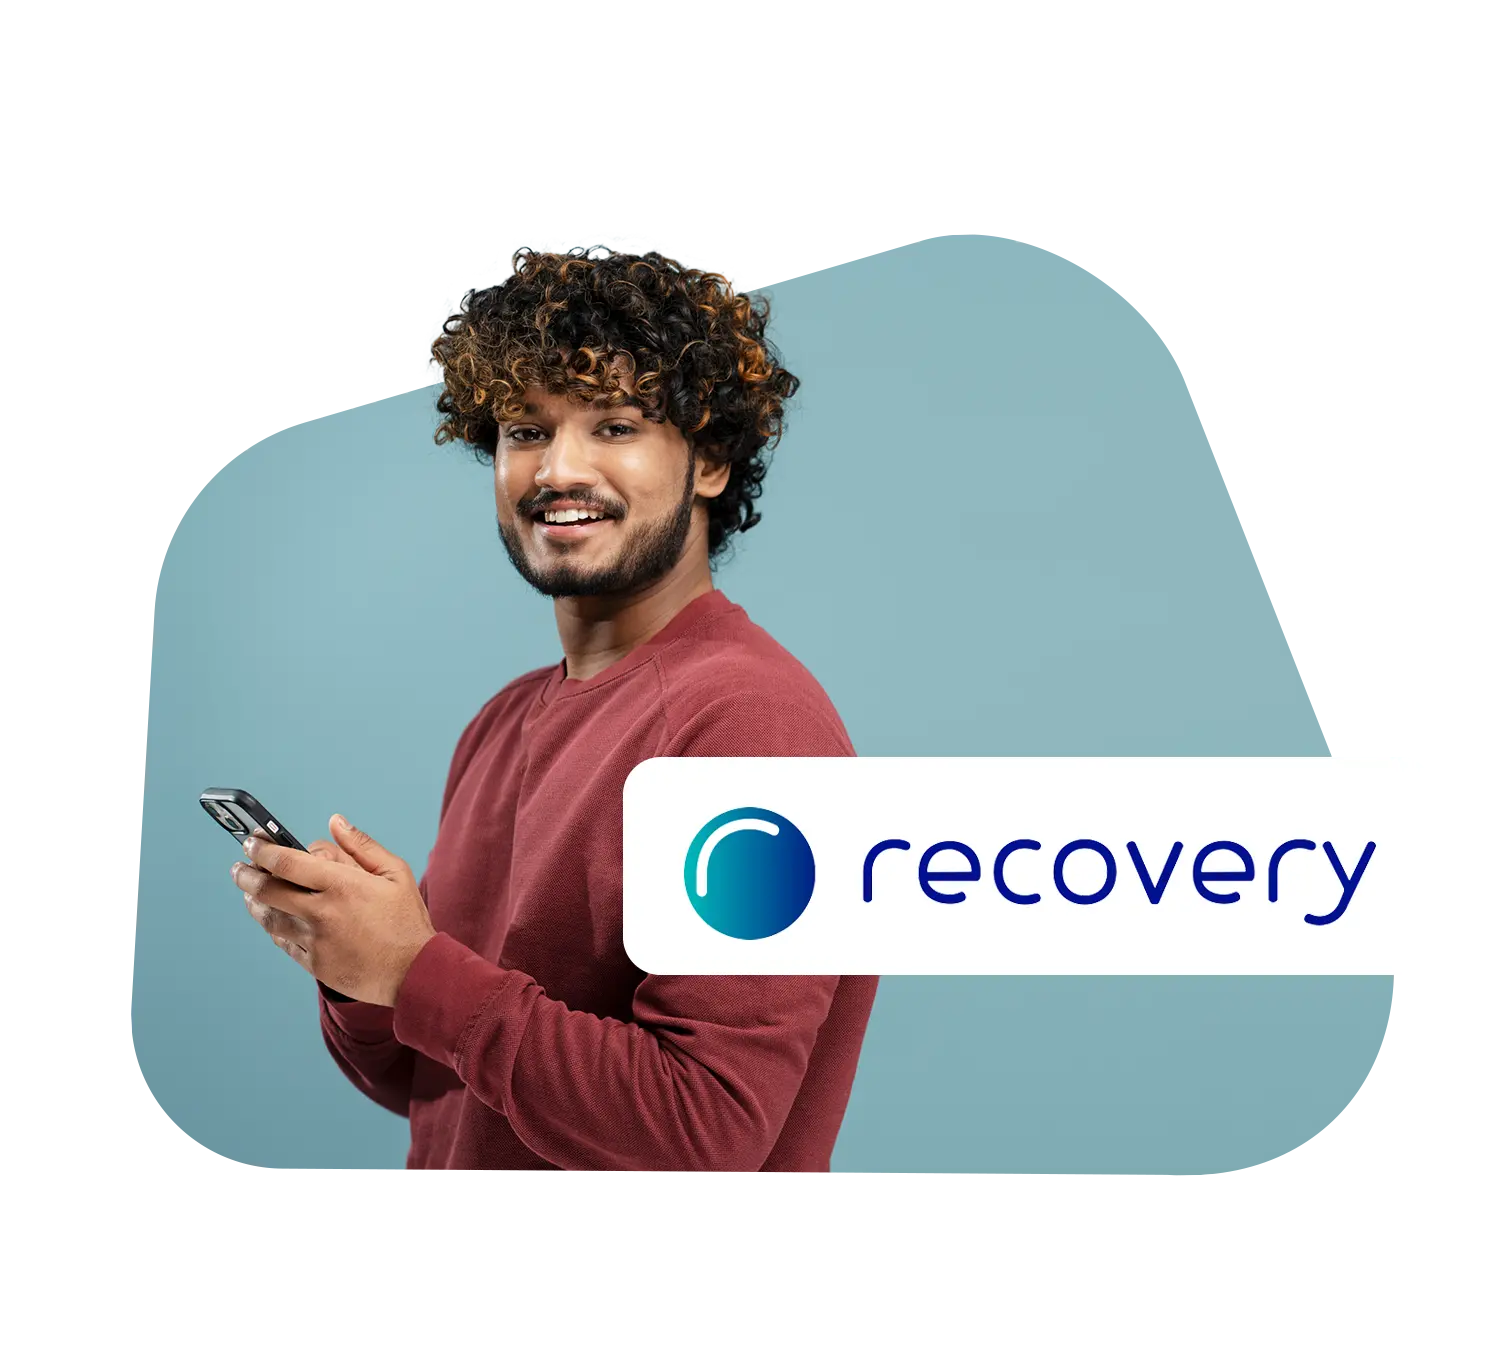 https://www.queroquitar.com.br/assets/images/lp-recovery-tp.png